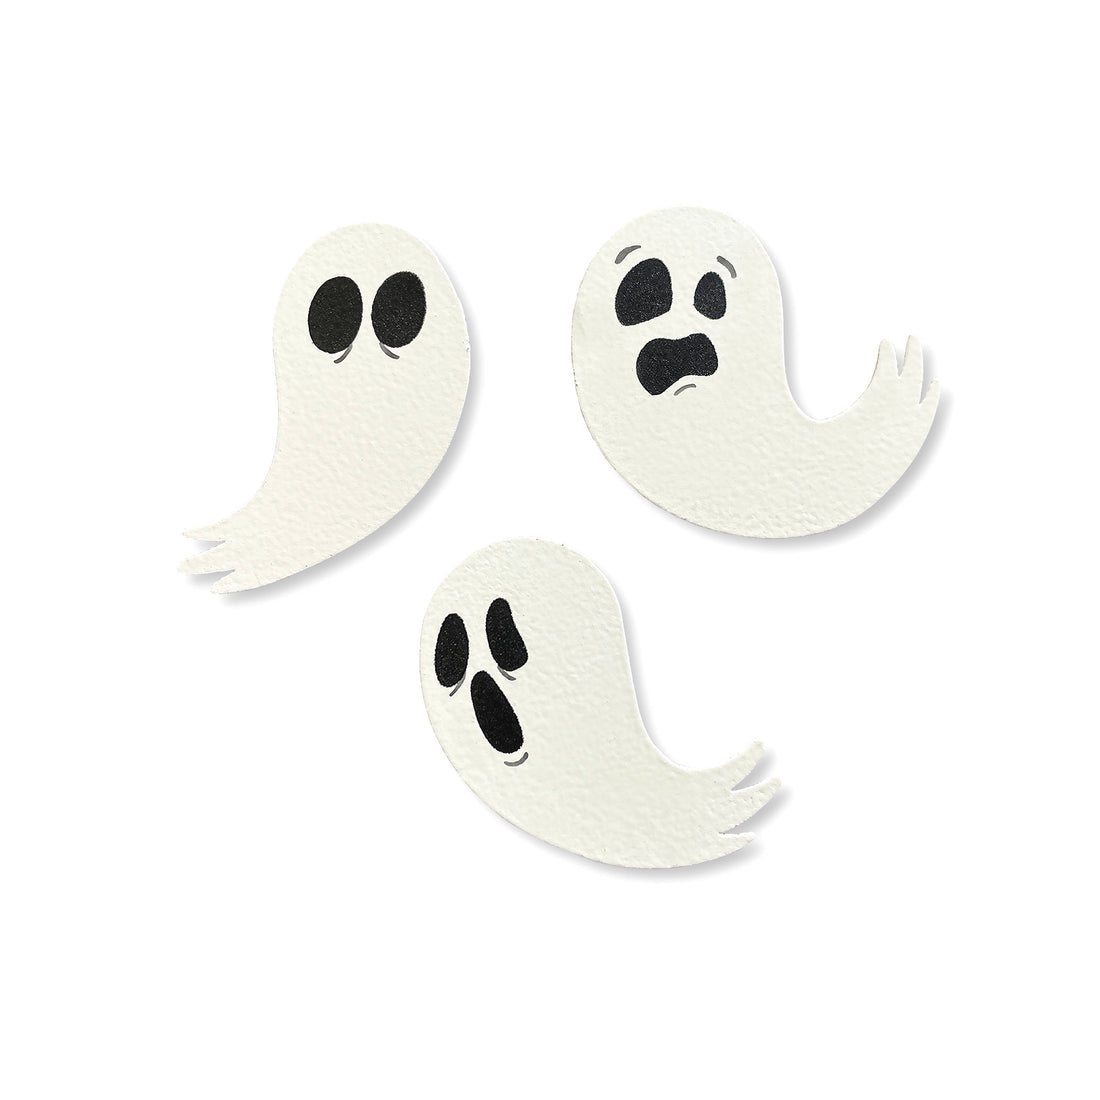 Spooky Ghost Magnets S/3